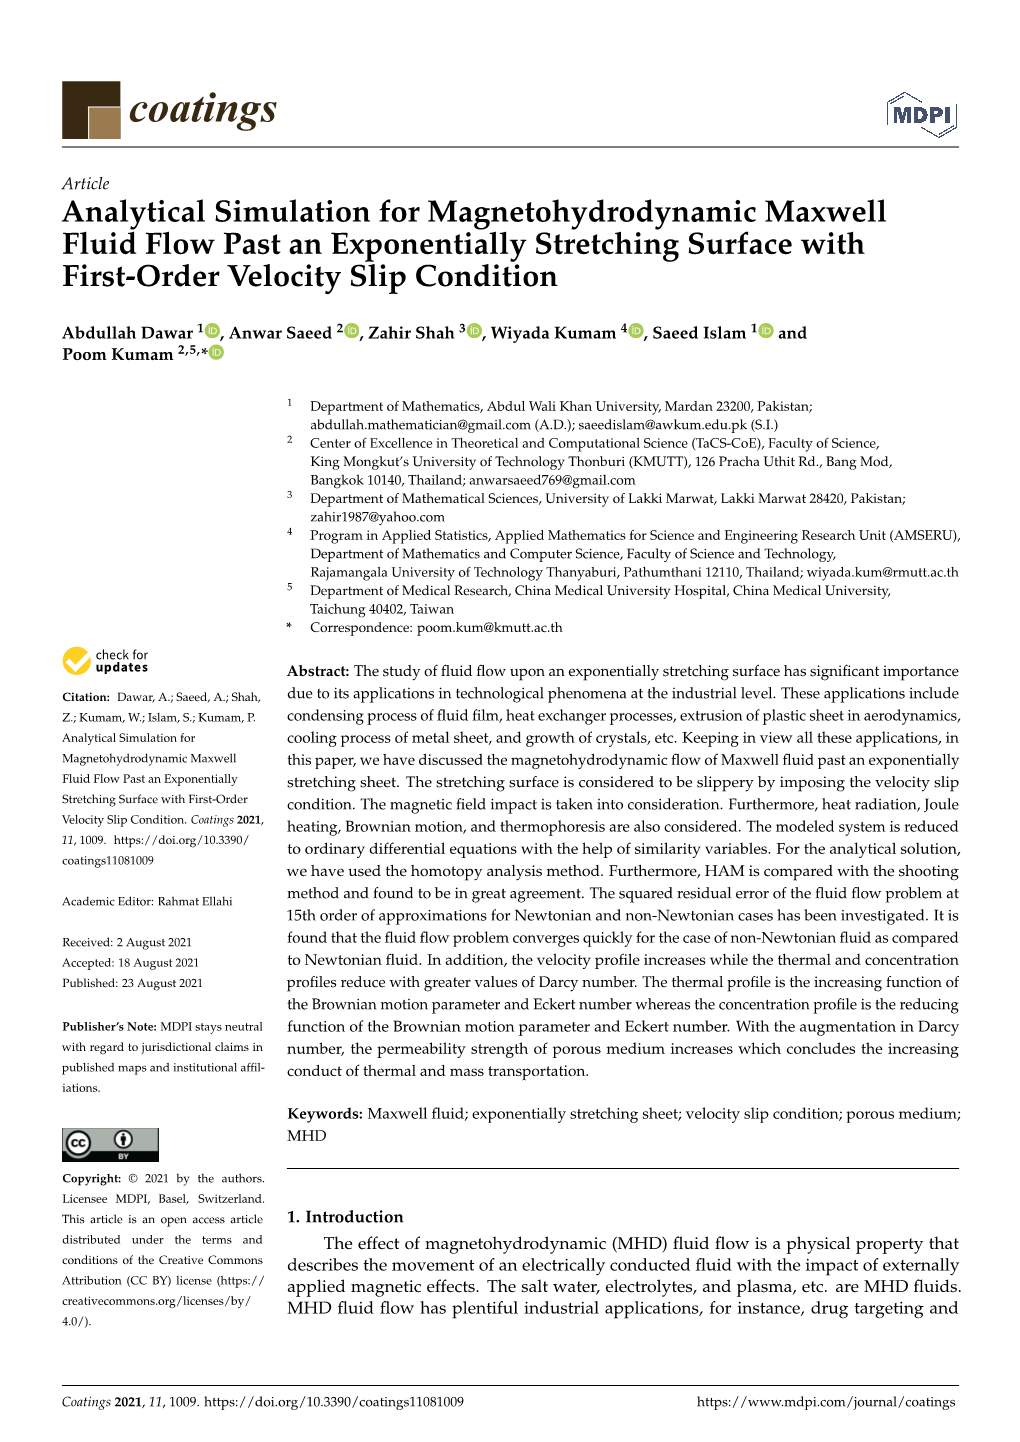 Analytical Simulation for Magnetohydrodynamic Maxwell Fluid Flow Past an Exponentially Stretching Surface with First-Order Velocity Slip Condition